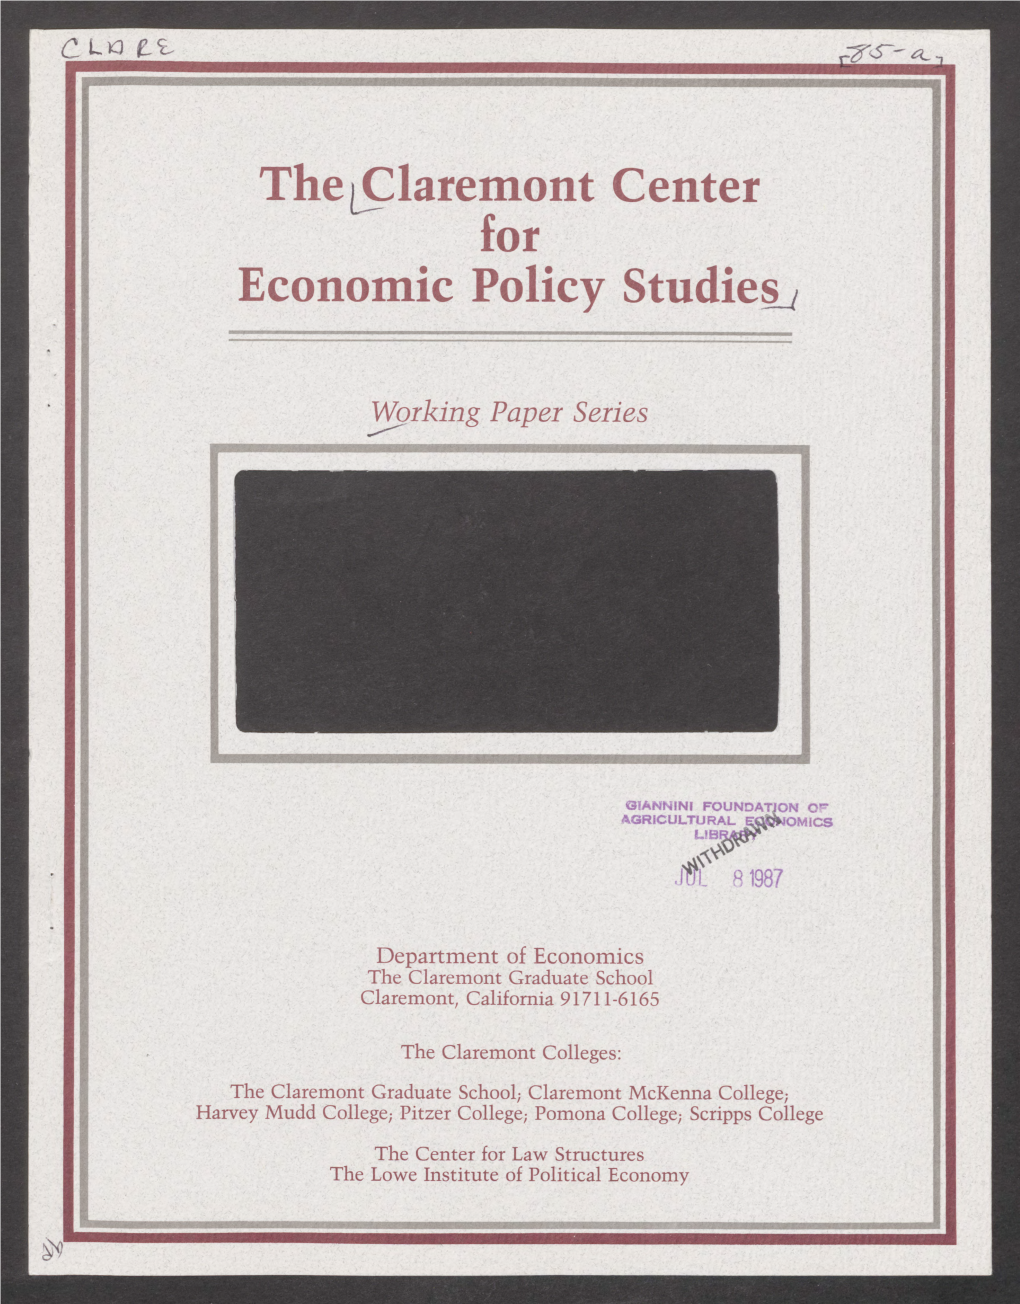 The Paremont Center for Economic Policy Studies